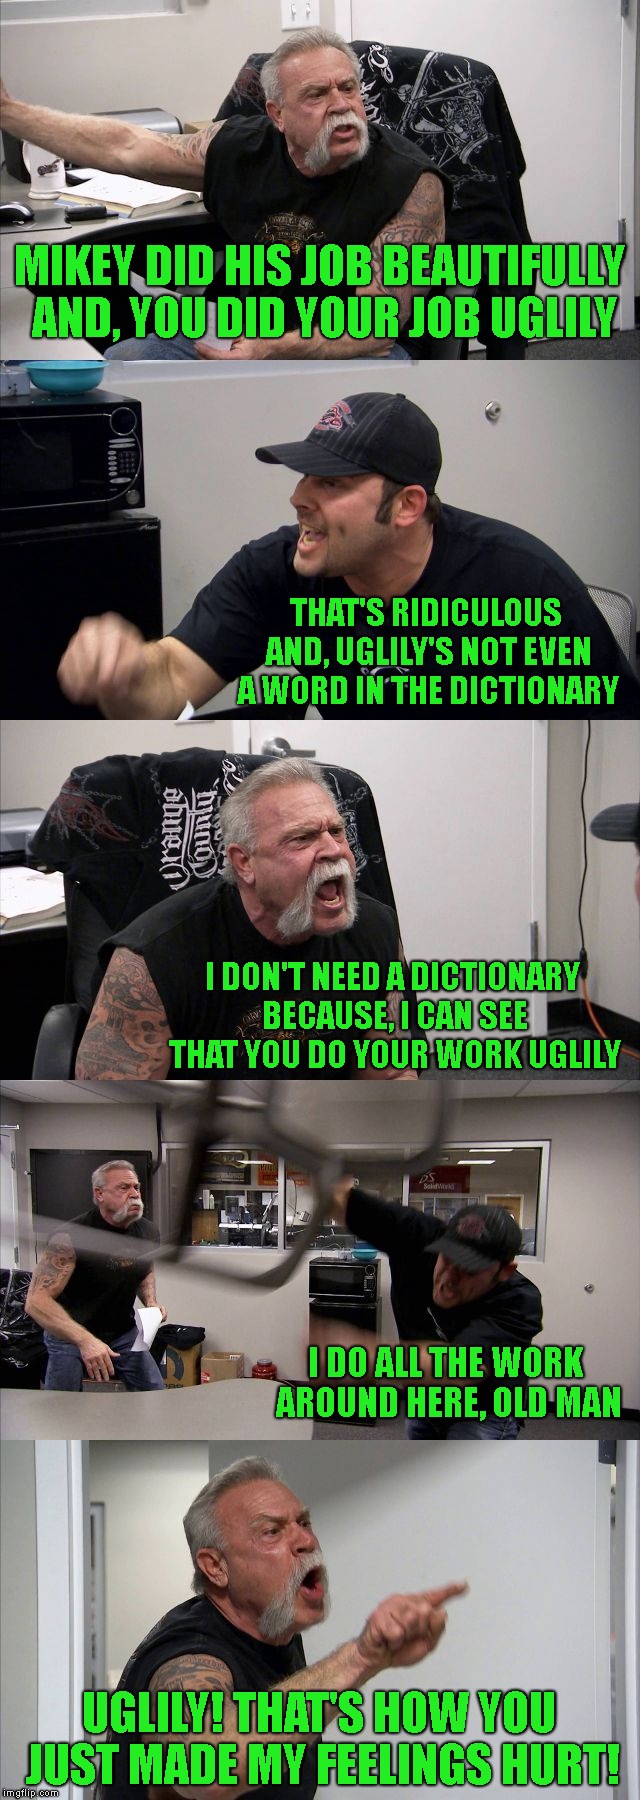 American Chopper Argument | MIKEY DID HIS JOB BEAUTIFULLY AND, YOU DID YOUR JOB UGLILY; THAT'S RIDICULOUS AND, UGLILY'S NOT EVEN A WORD IN THE DICTIONARY; I DON'T NEED A DICTIONARY BECAUSE, I CAN SEE THAT YOU DO YOUR WORK UGLILY; I DO ALL THE WORK AROUND HERE, OLD MAN; UGLILY! THAT'S HOW YOU JUST MADE MY FEELINGS HURT! | image tagged in american chopper,american chopper argument,arguments,relationship,family,grammar nazi | made w/ Imgflip meme maker